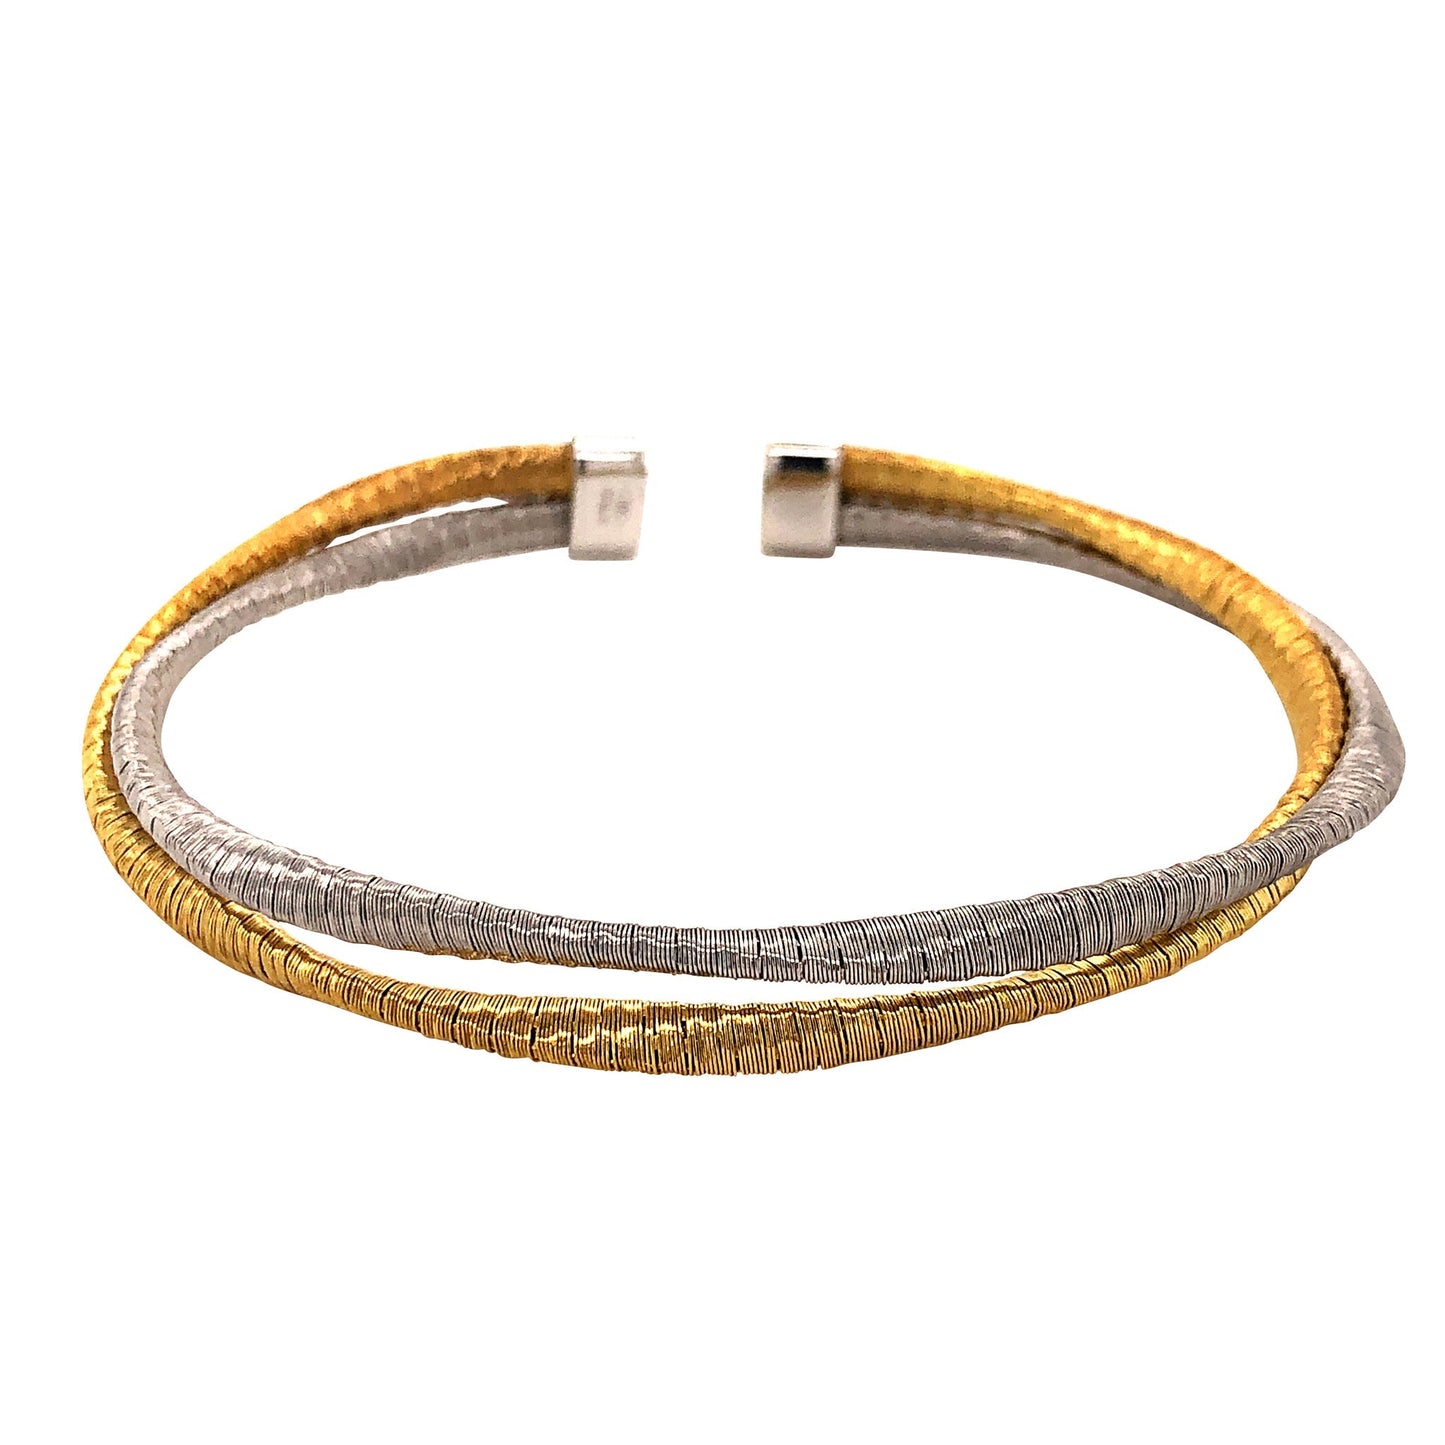 A twisted dual cable two tone bracelet displayed on a neutral white background.